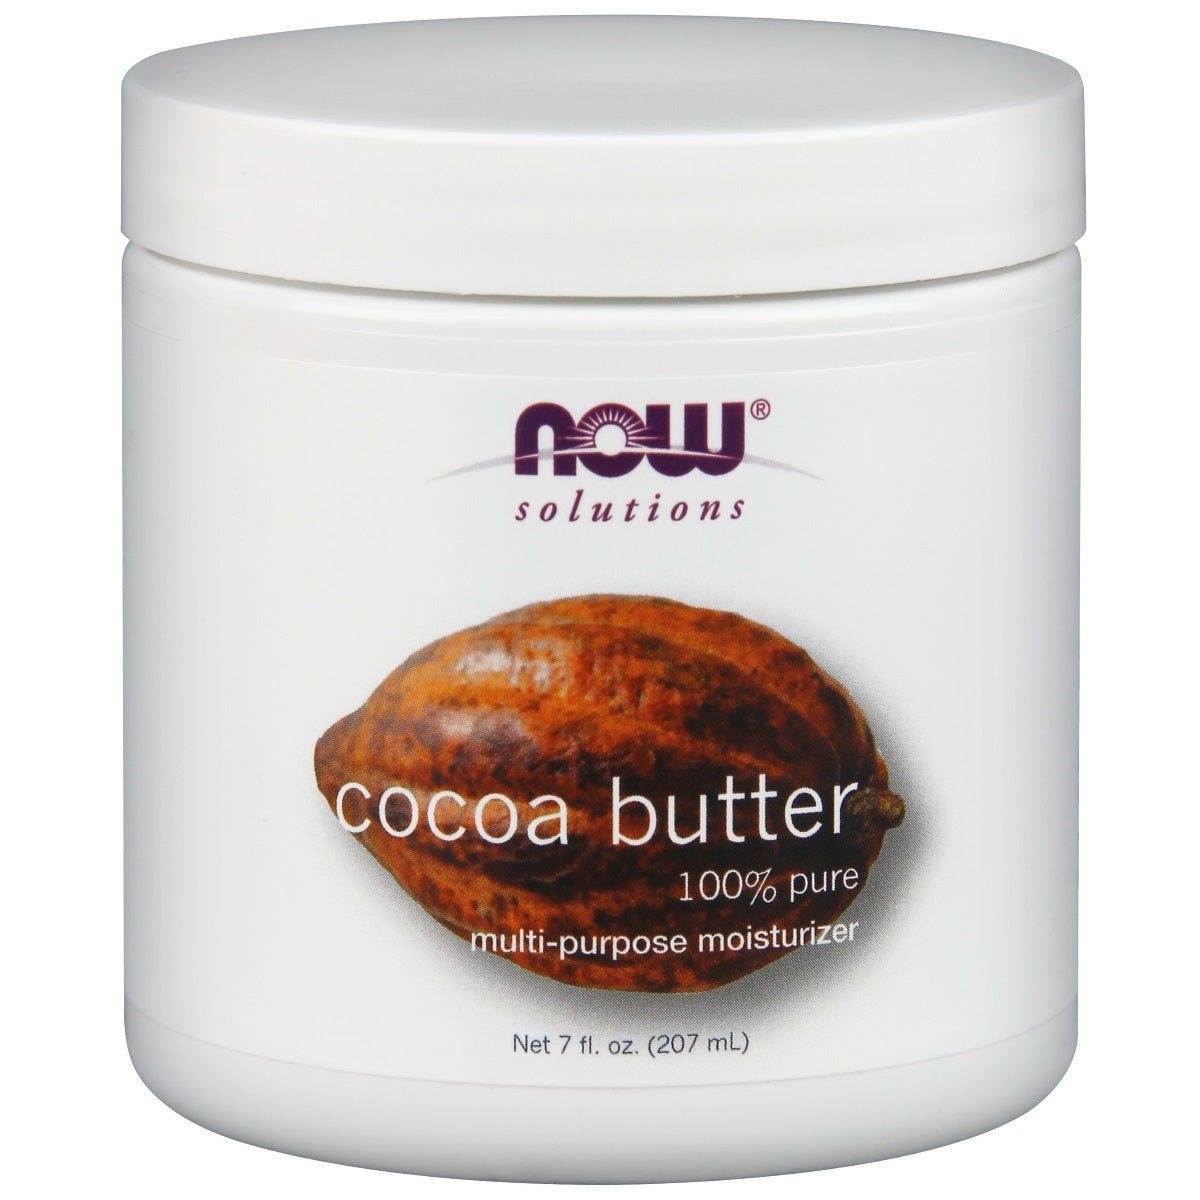 Primary image of Pure Cocoa Butter